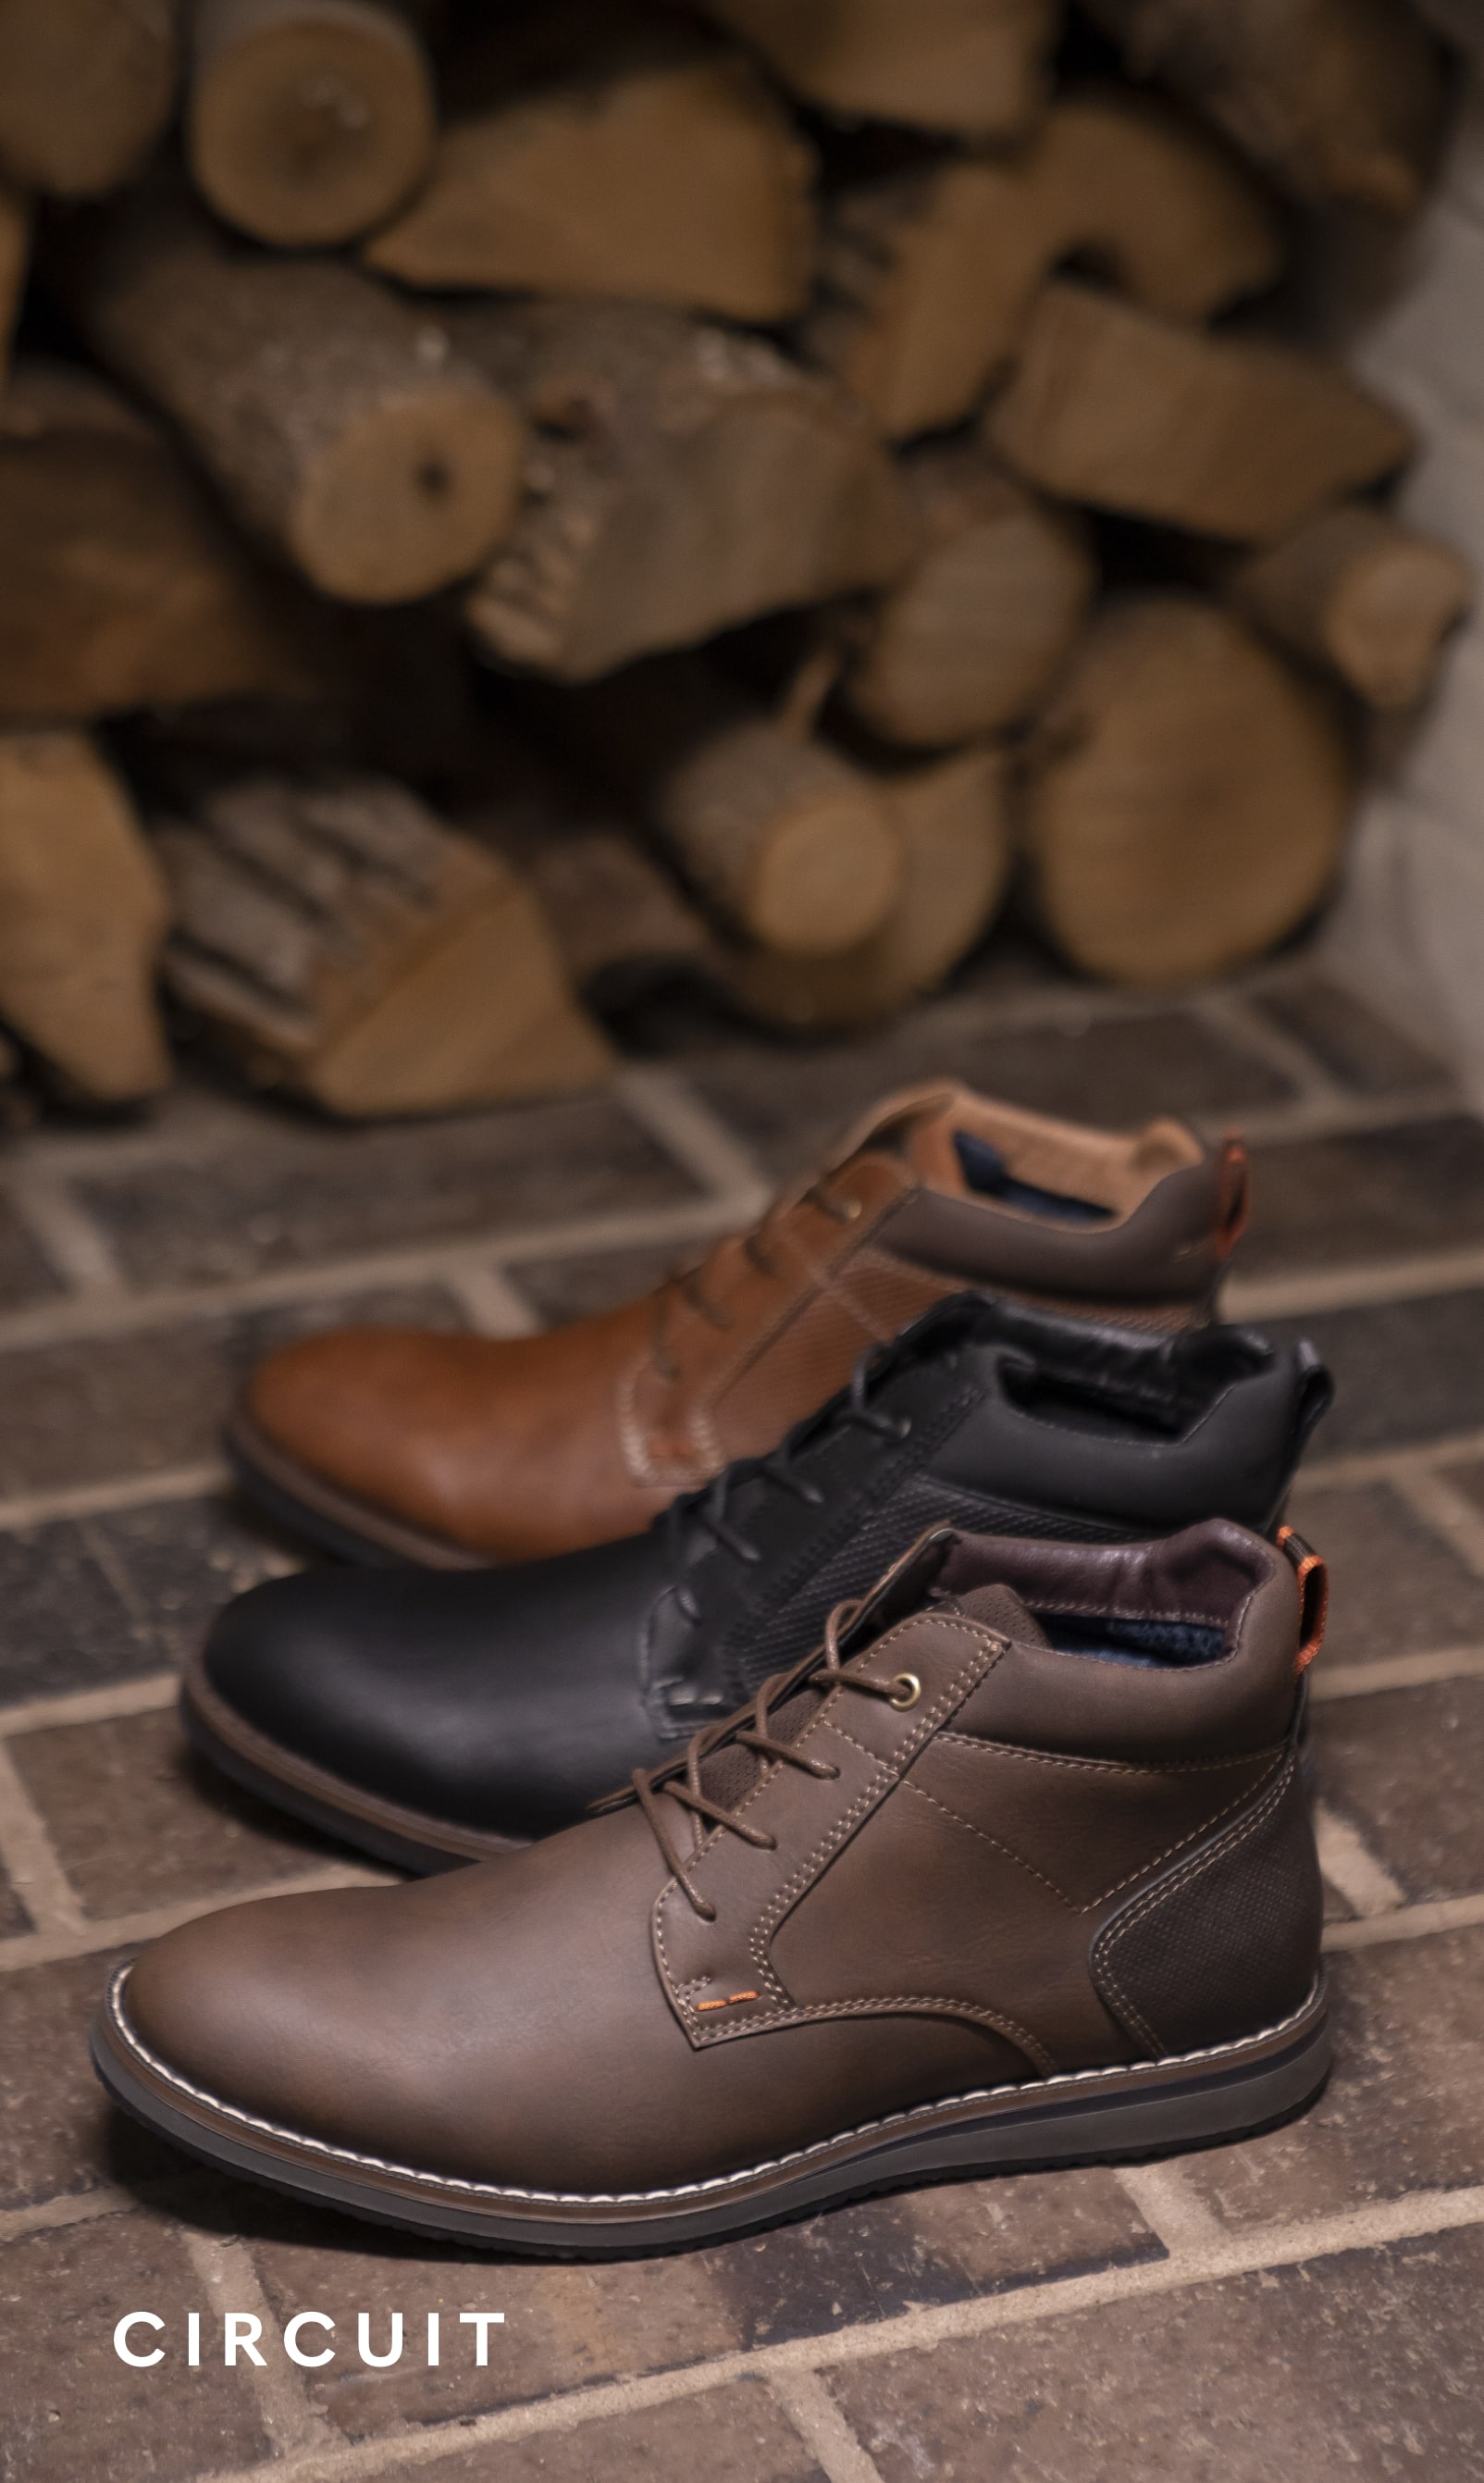 Men's Newest Shoes category. Image features the Circuit boot in all 3 colorways.